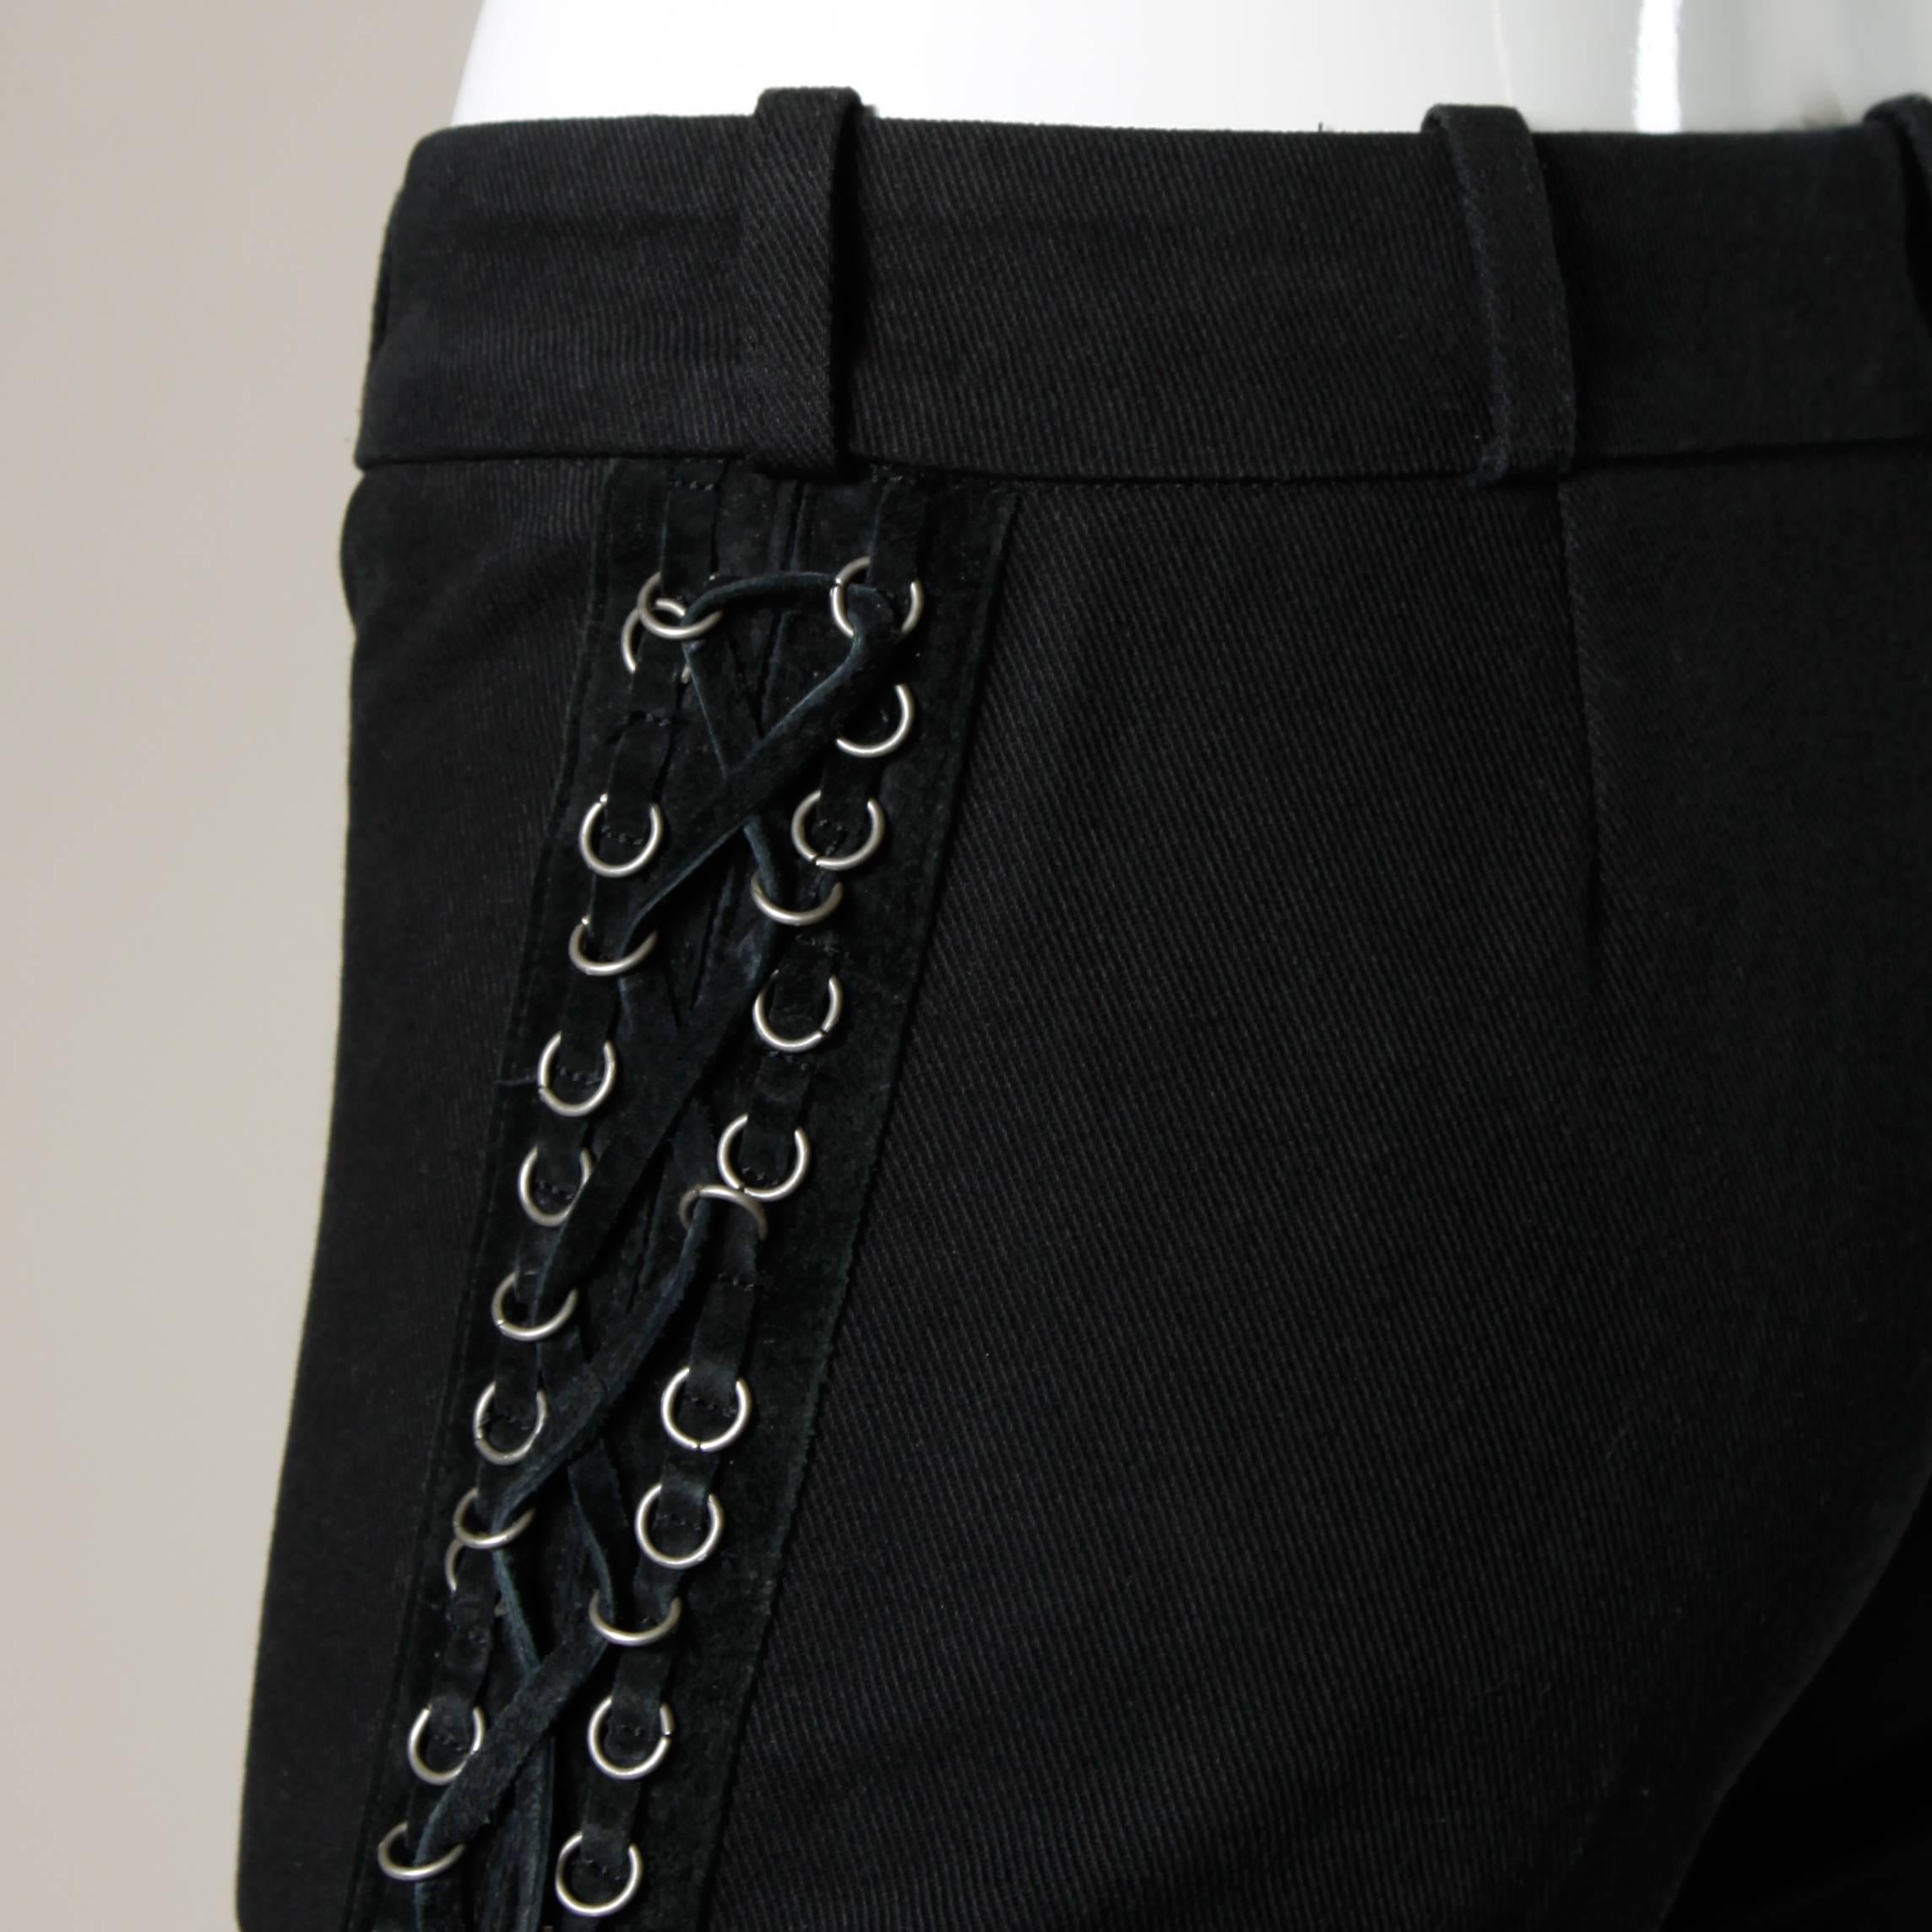 Absolutely incredible black heavy weight denim bell bottom pants with leather lace up detail on the sides of the pants. Ultra flattering flared leg and metal ring detailing. 

Details:

Unlined
Back Pocket
Front Metal Zip and Button 
Marked